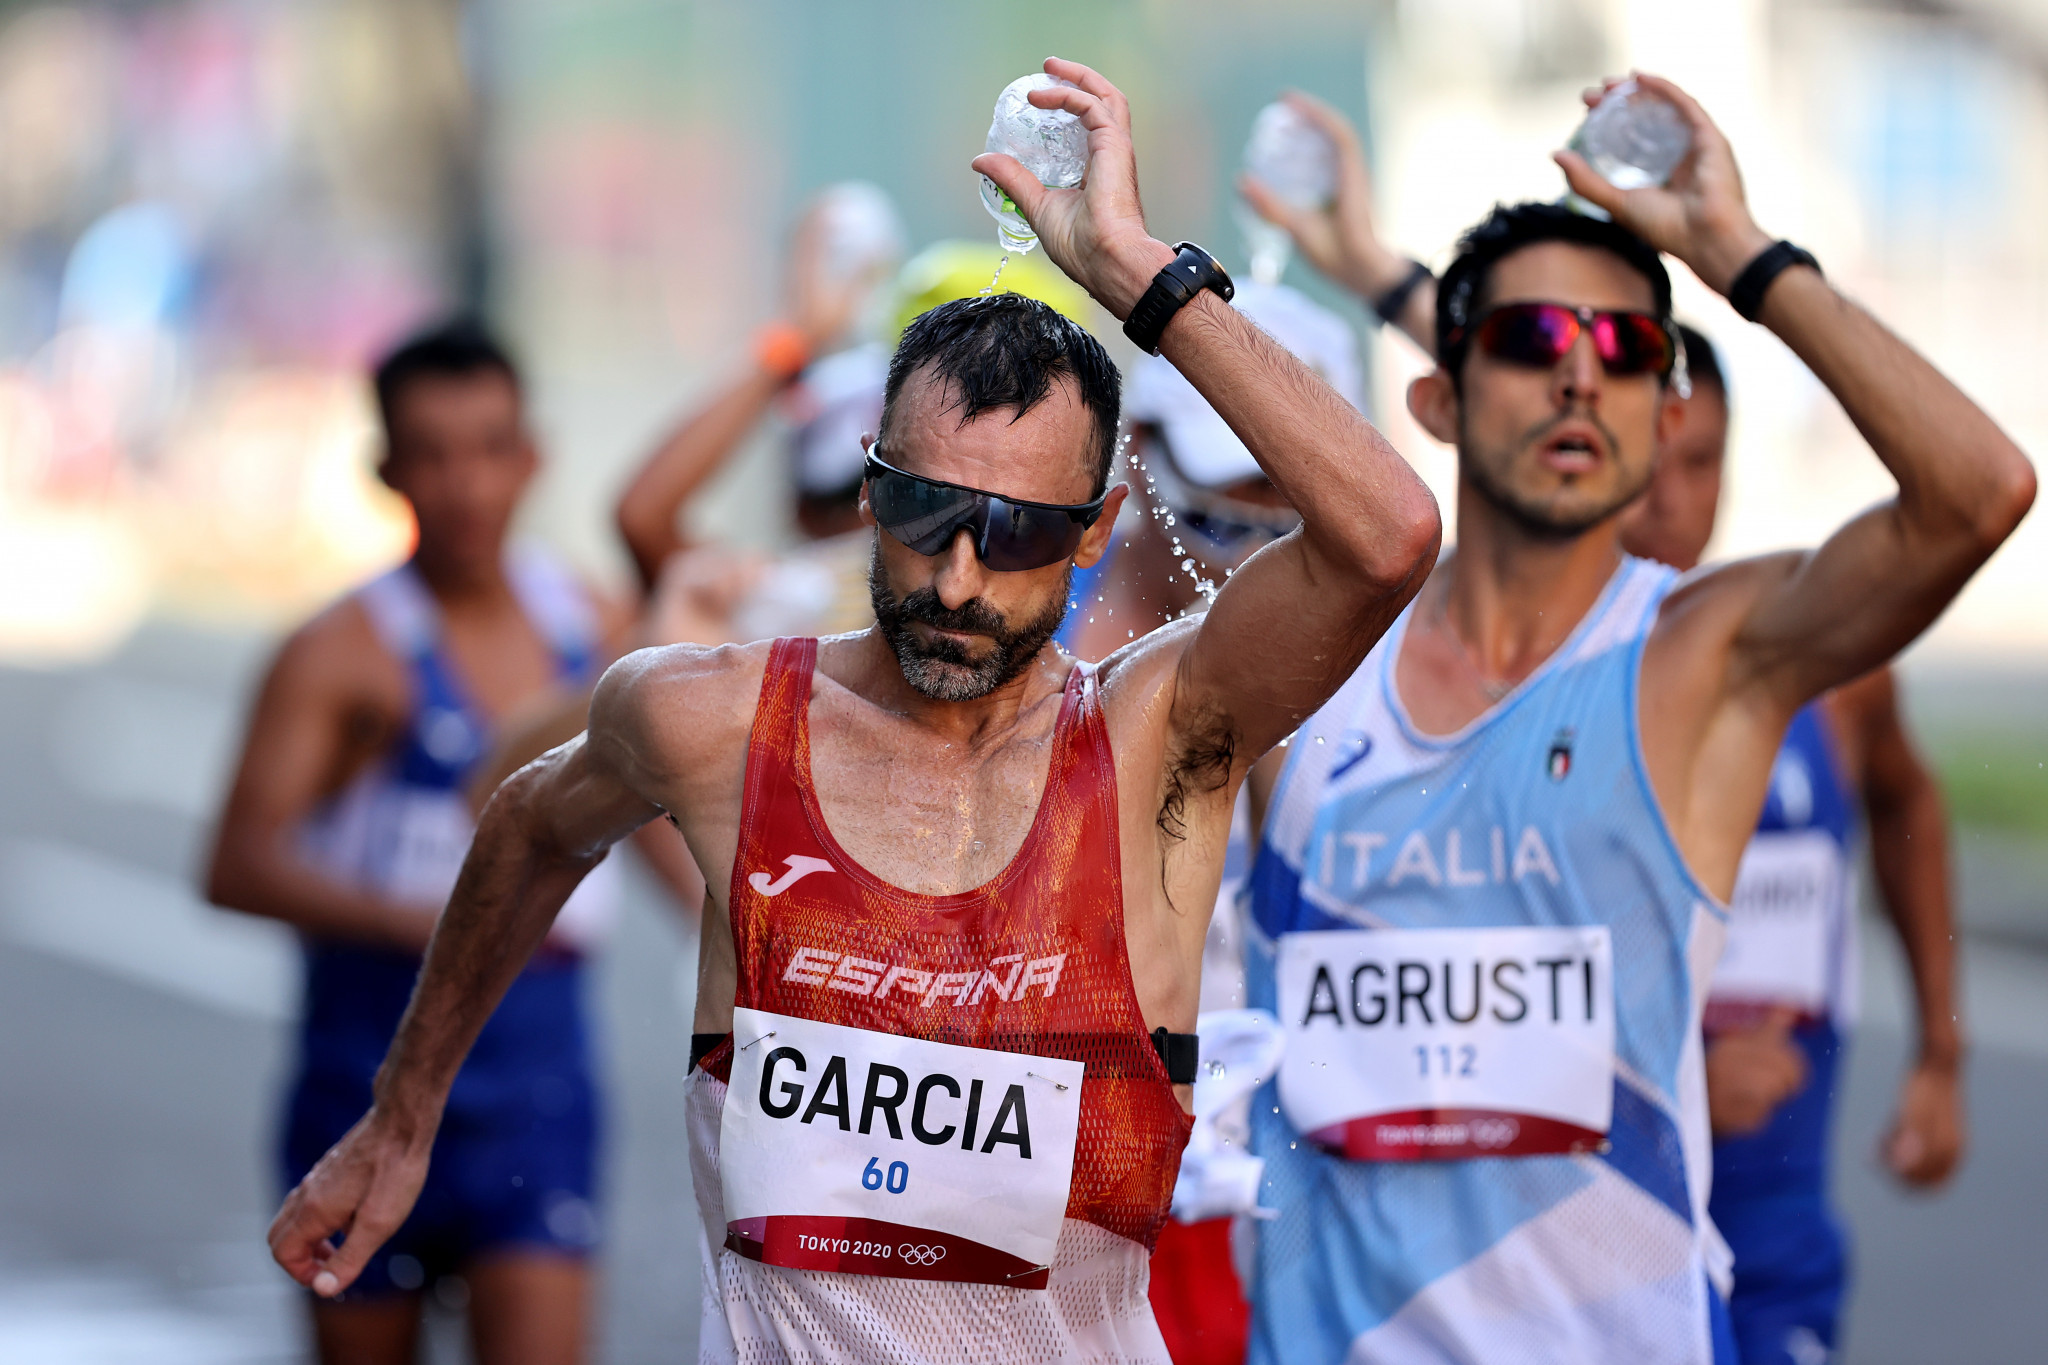 Tokyo 2020 was the eighth Olympic Games for Spain's Jesús Ángel García ©Getty Images